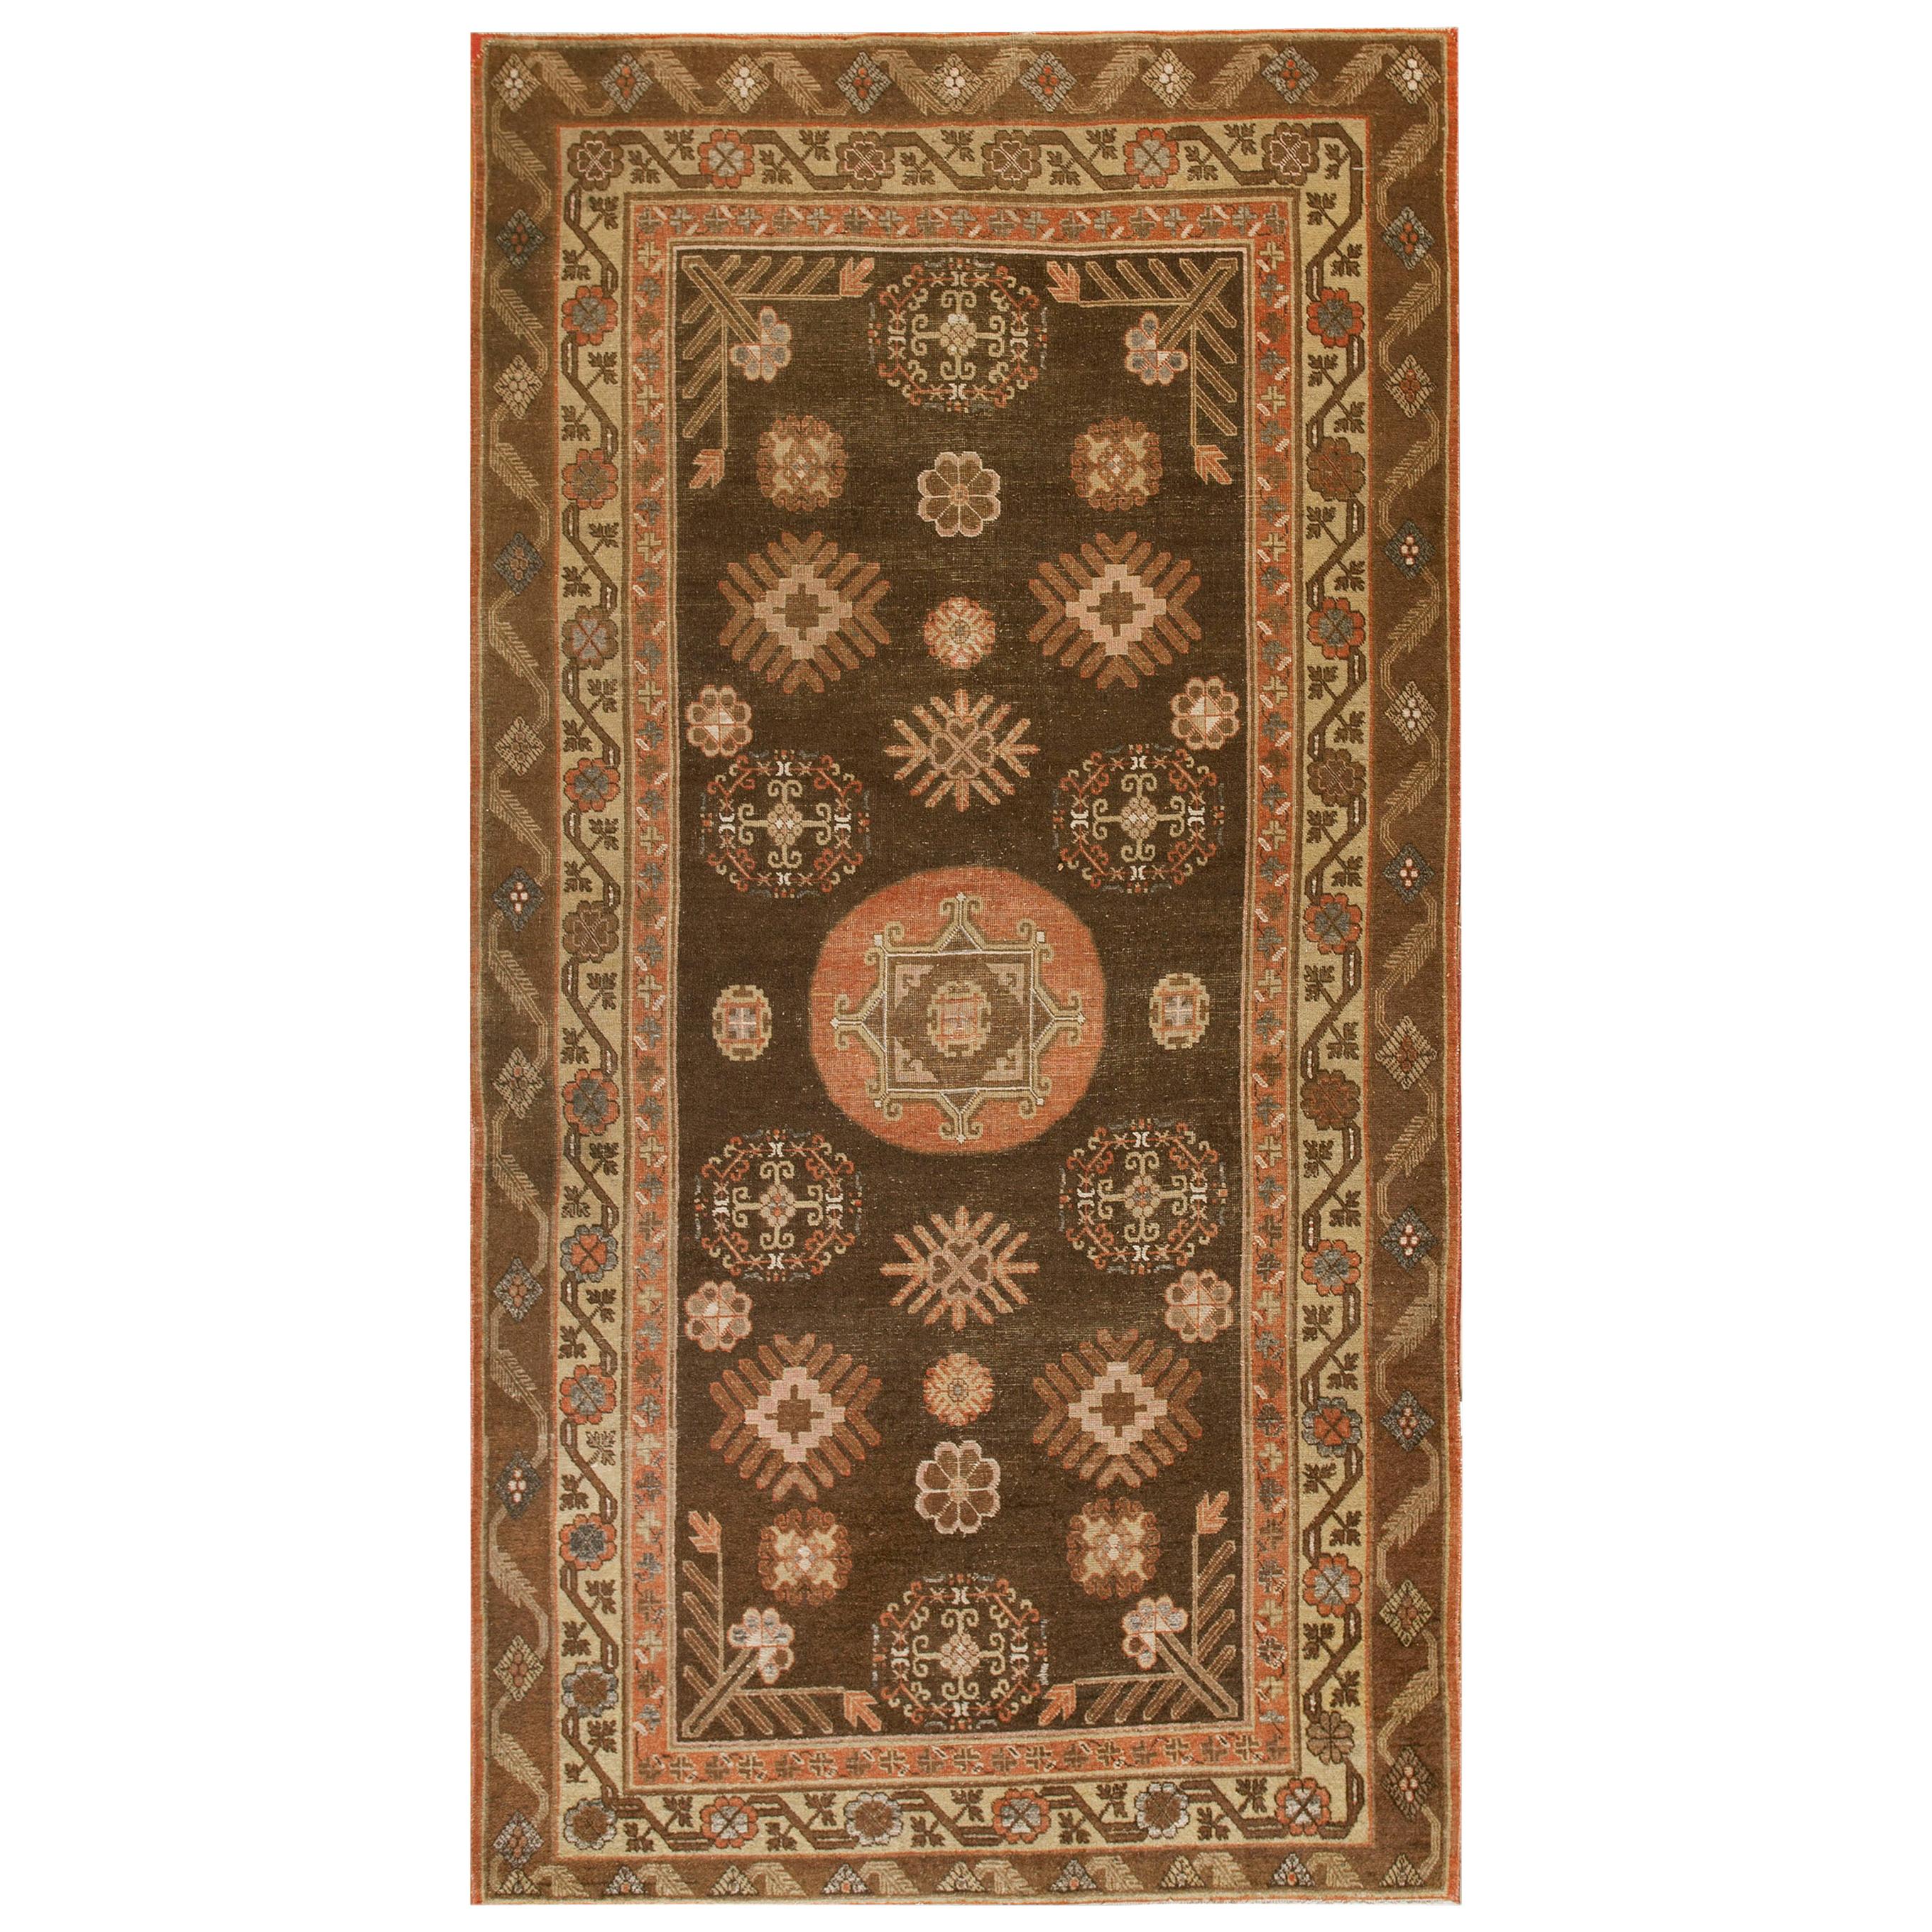 Early 20th Century Central Asian Chinese Khotan Carpet (5'8" x 11'4"-173 x 345)